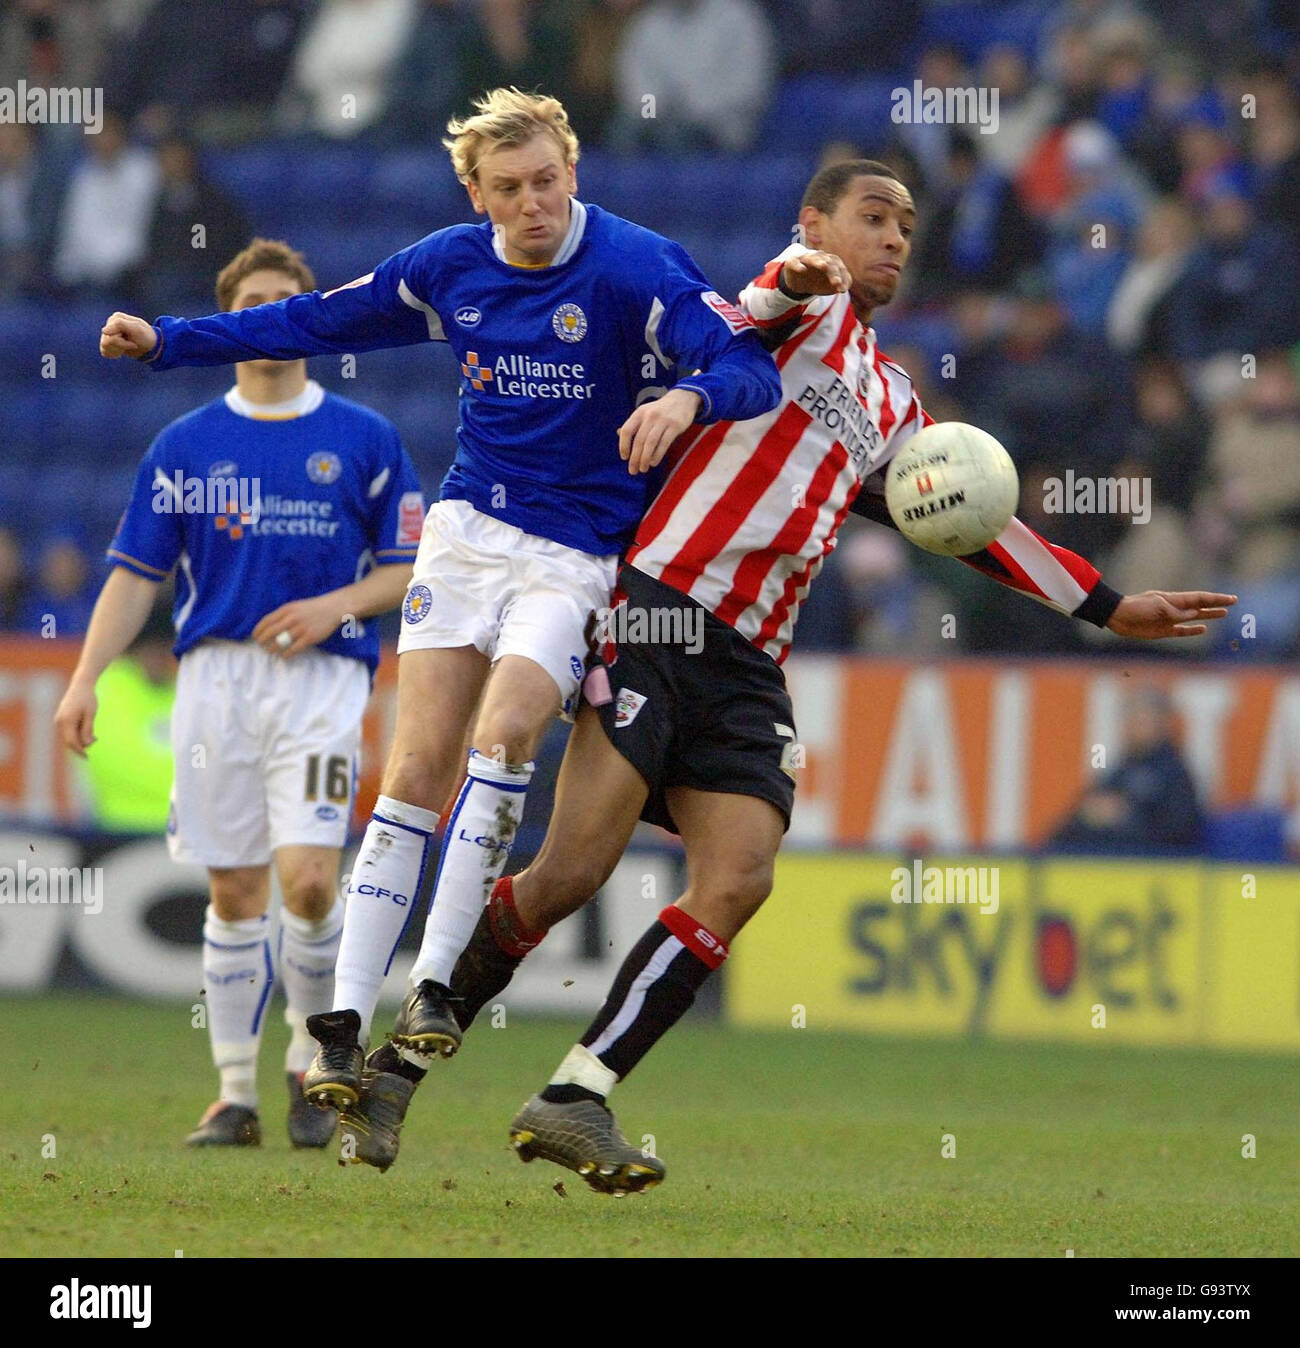 Leicester City's Stephen Hughes (L) battles for the ball with Southampton's Dexter Blackstock during the FA Cup fourth round match at the Walkers Stadium, Leicester, Saturday January 28, 2006. PRESS ASSOCIATION Photo. Photo credit should read: Matthew Fearn/PA. Stock Photo